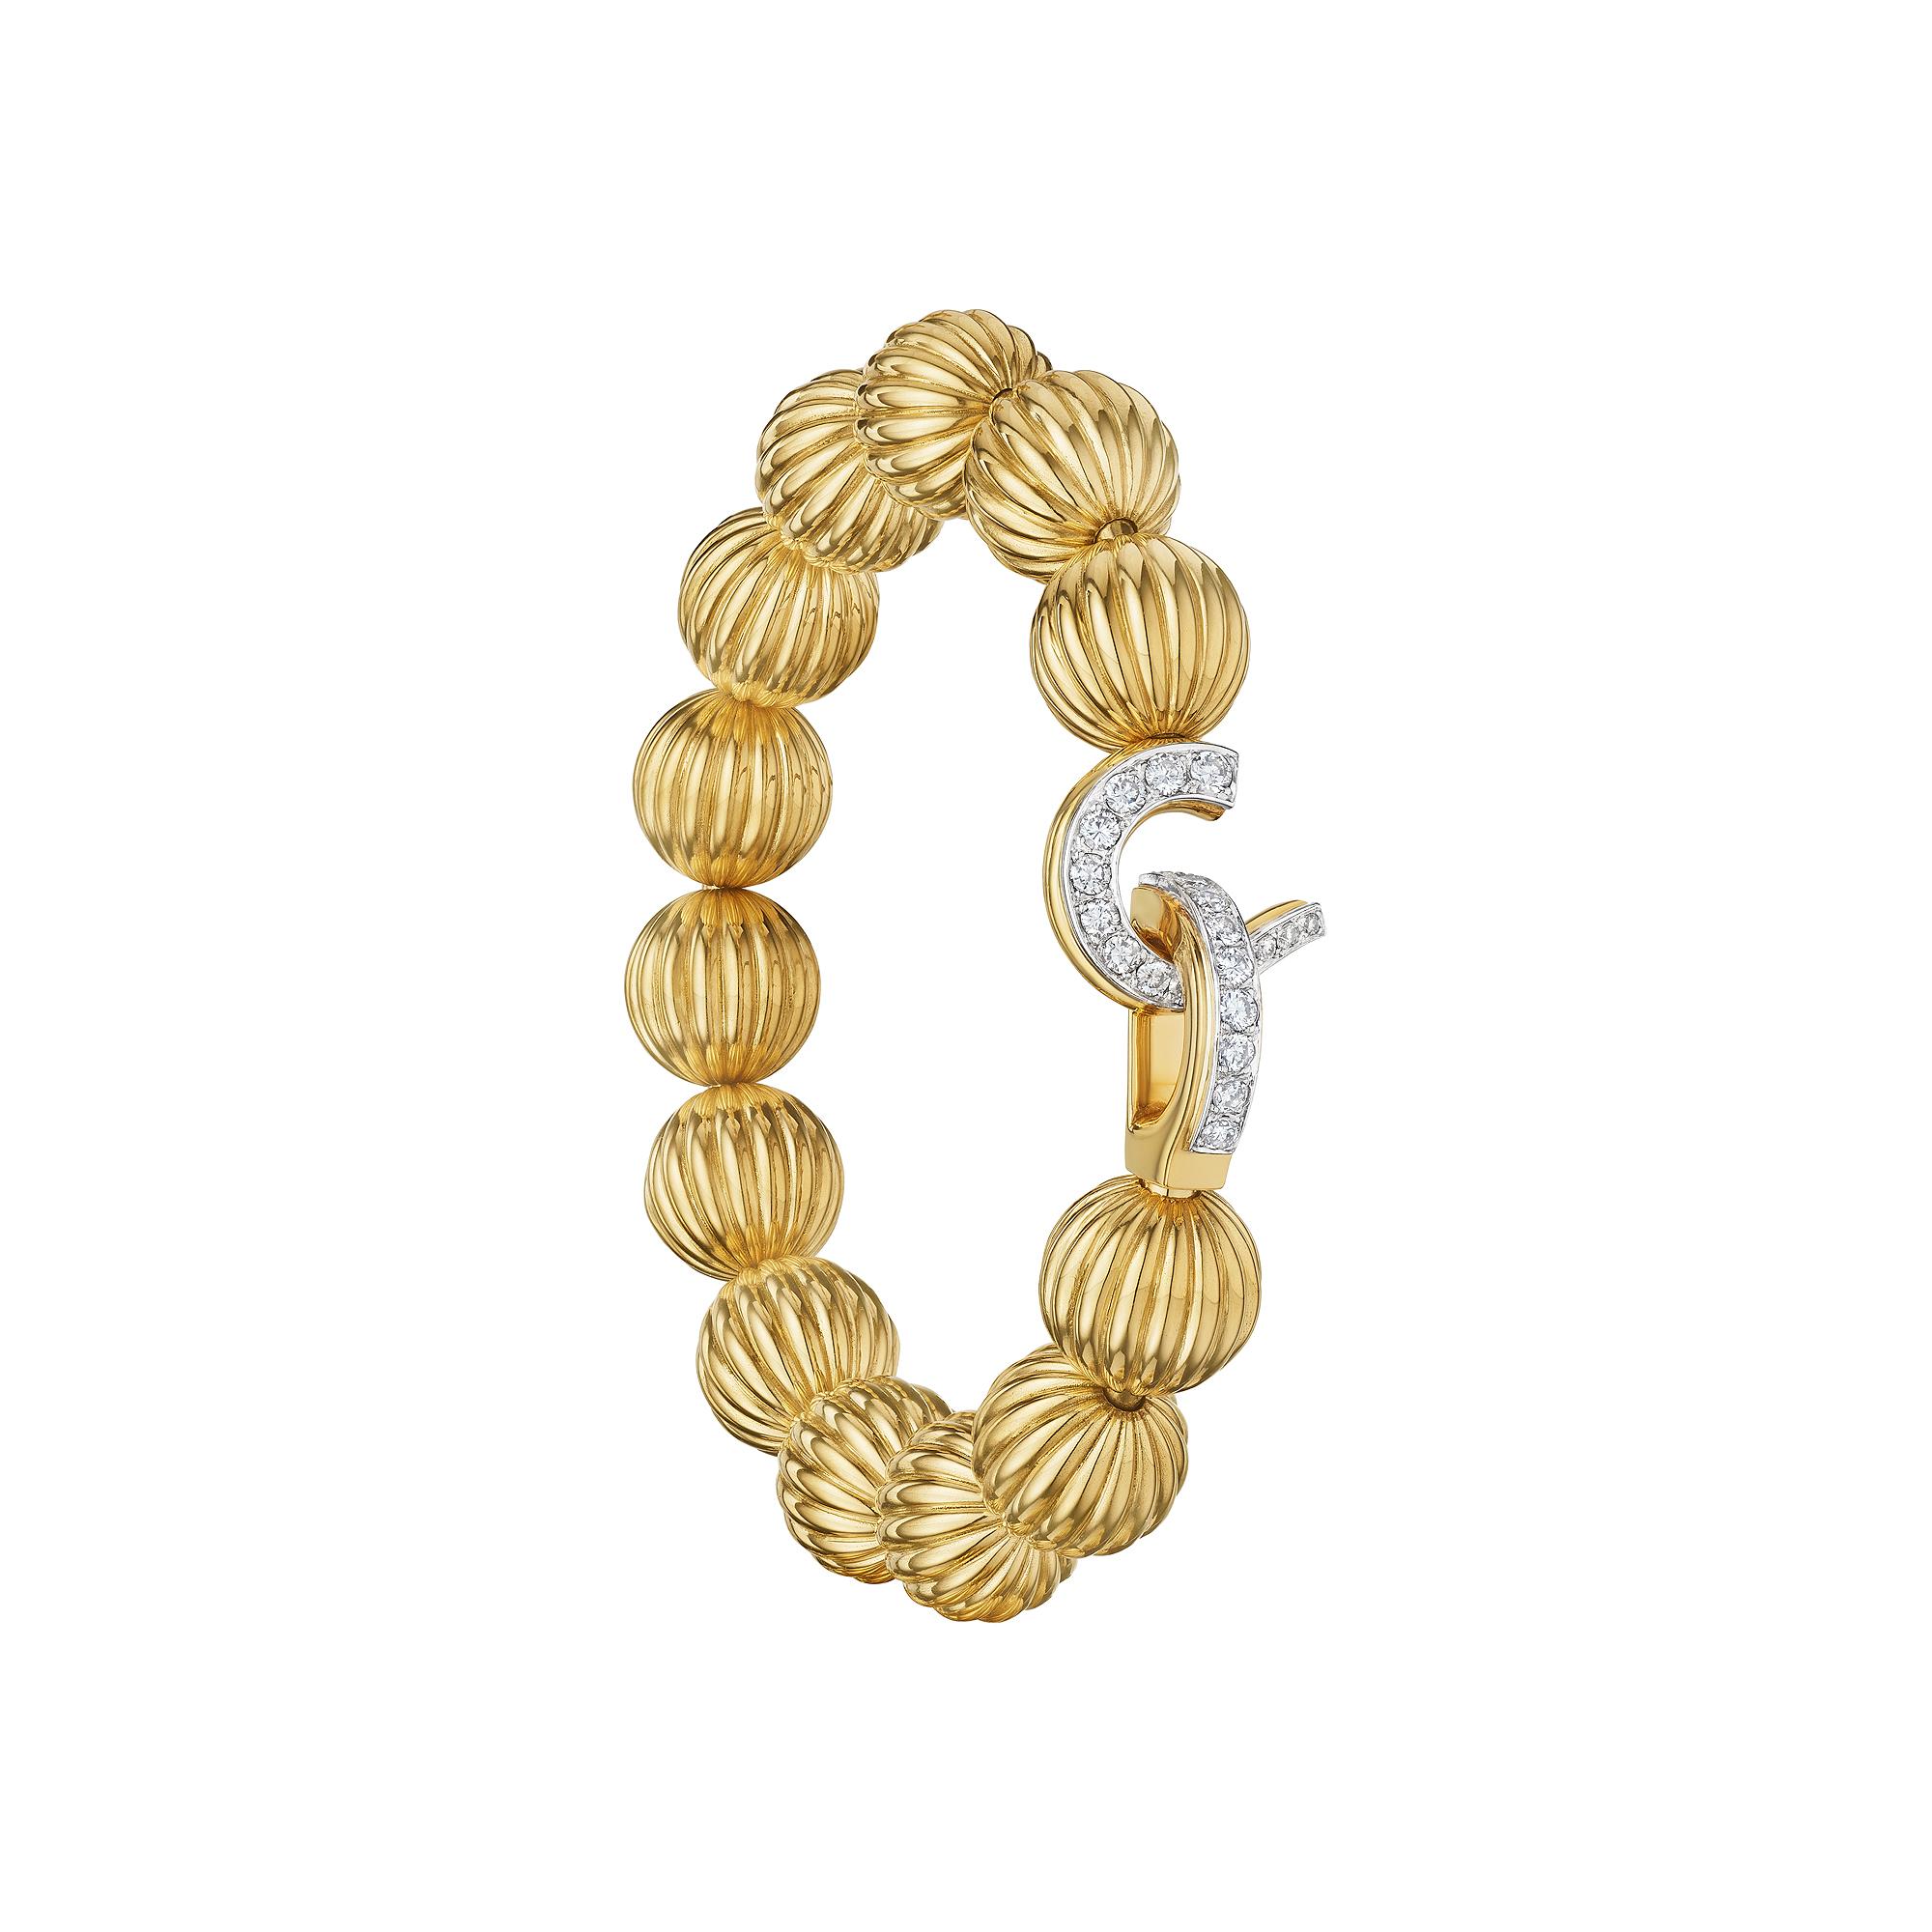 Elegantly dancing around the wrist these 13 carved gold melon shaped beads create a compelling Cartier Paris vintage bracelet that is both collectible and hard to resist.  The eye-catching diamond hook and eye closure completes the one-of-a-kind